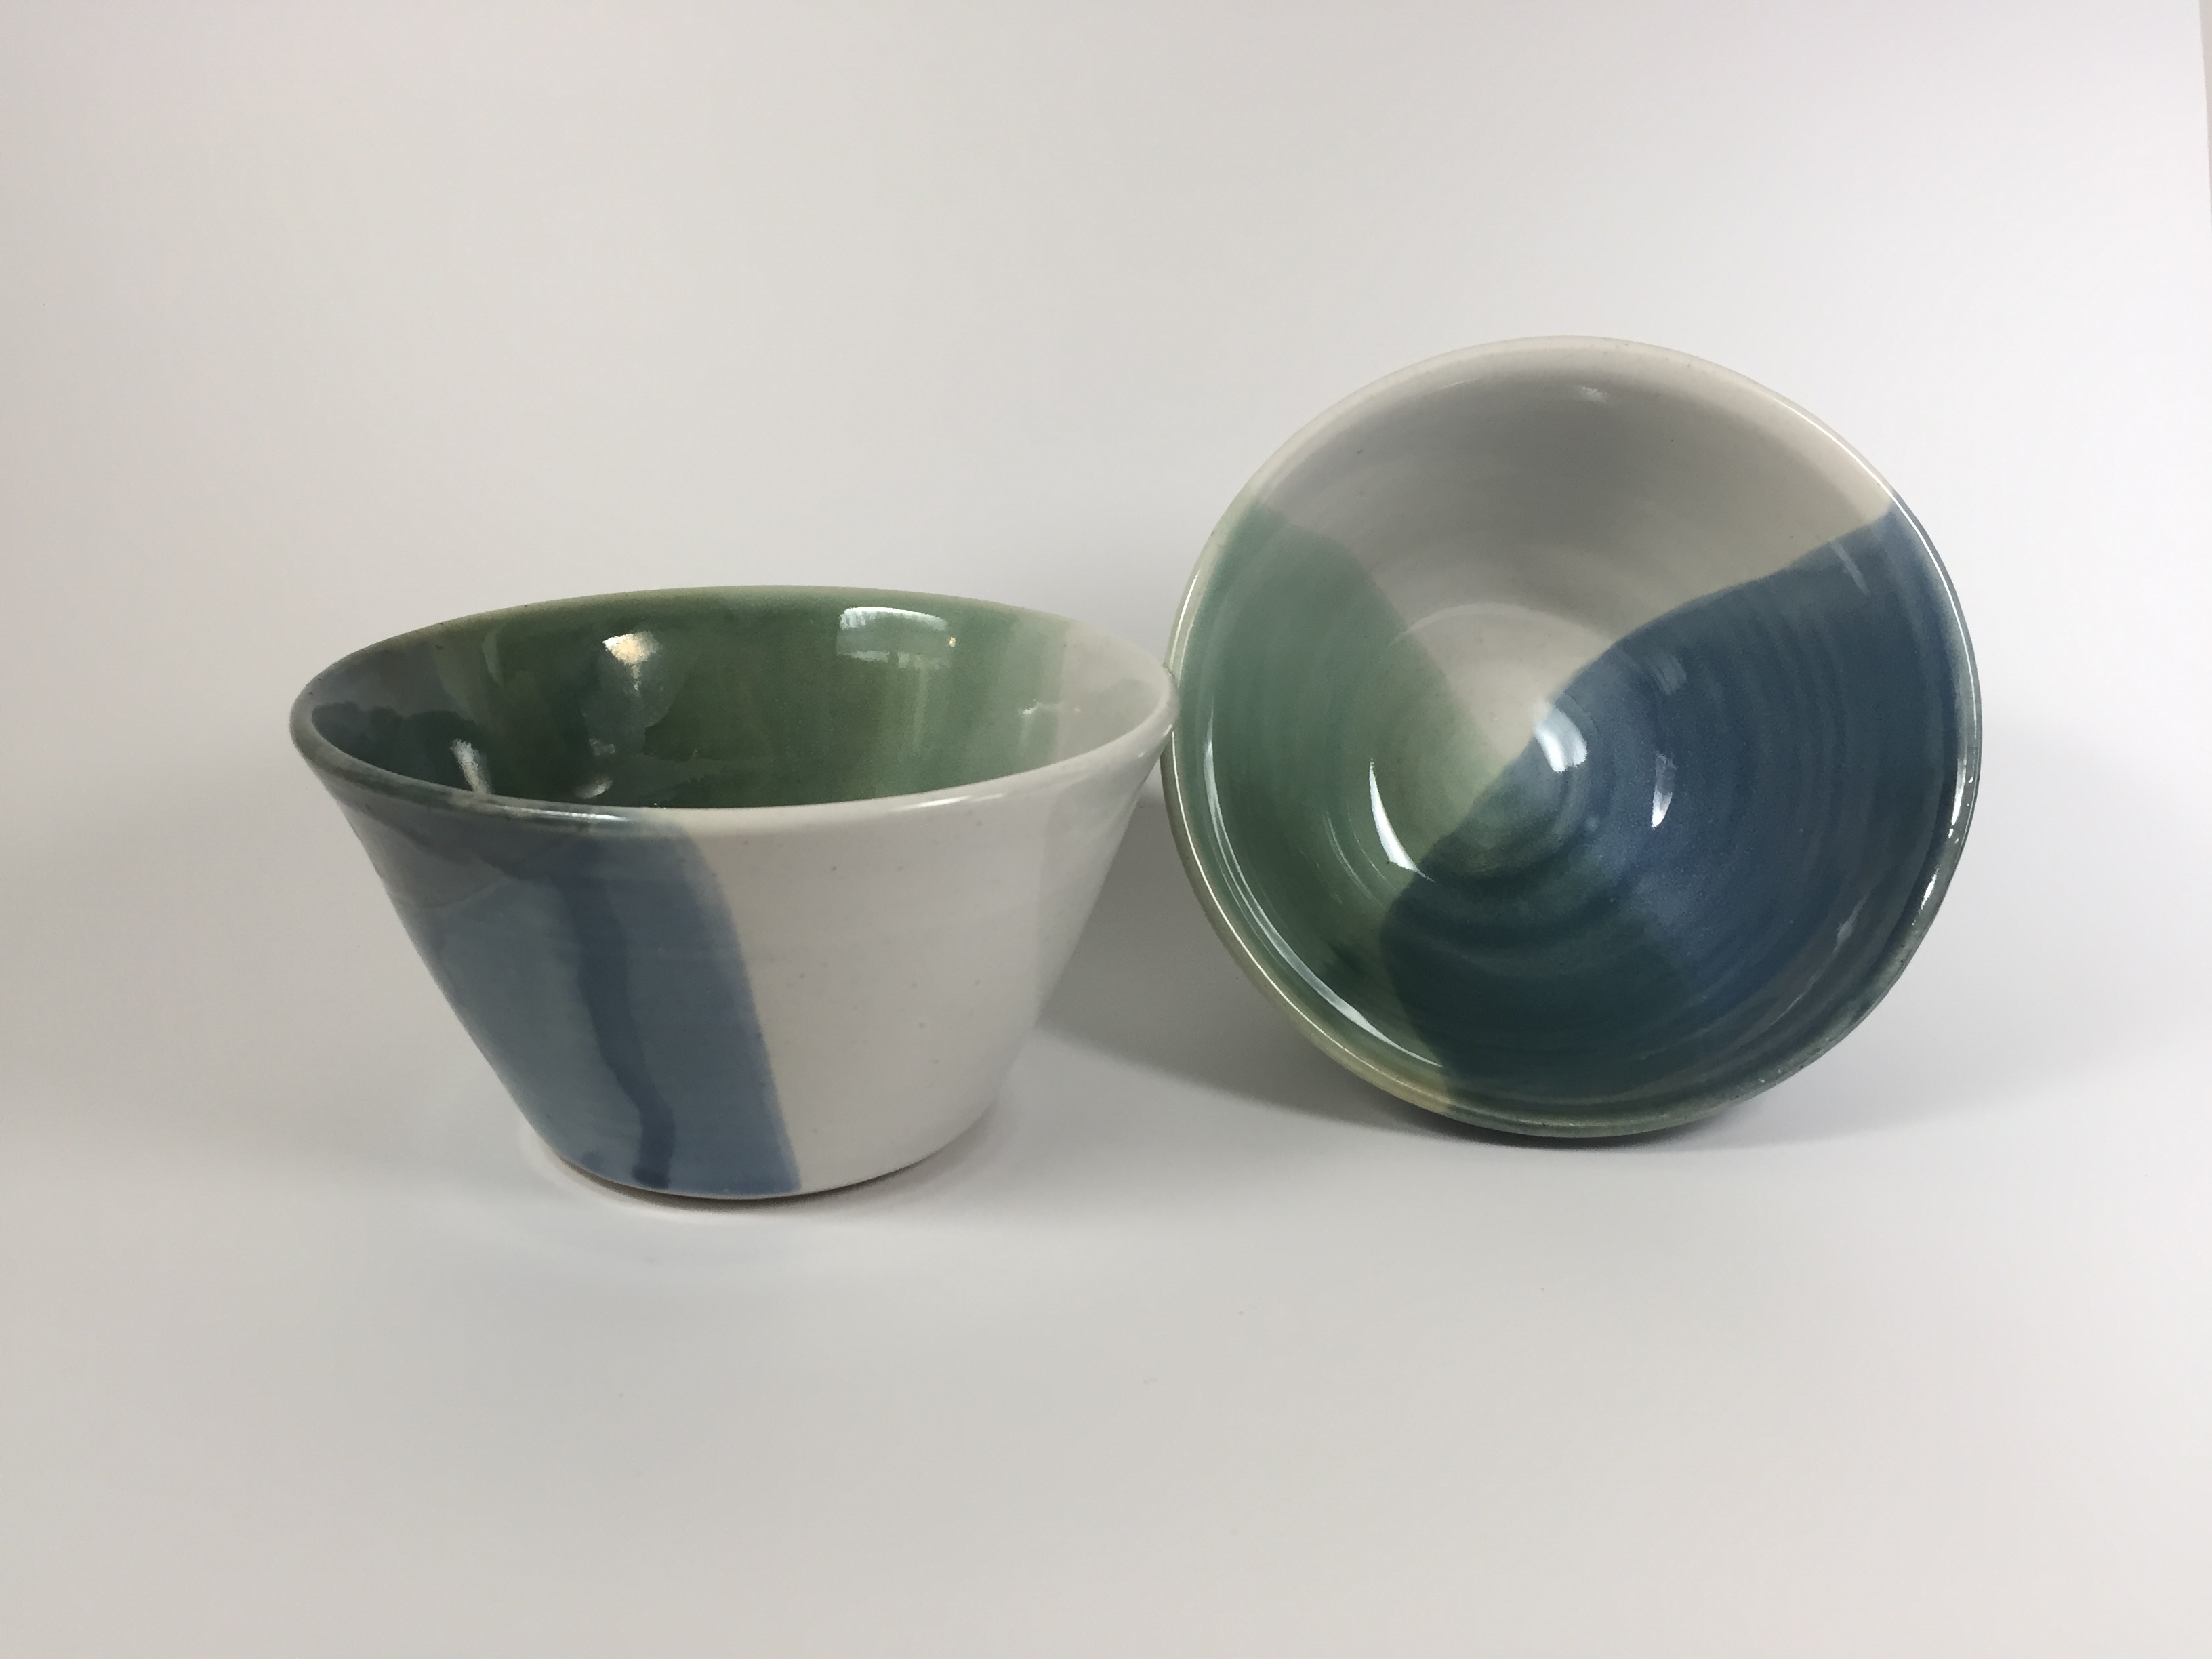 Green and Blue Oribe Cereal Bowls